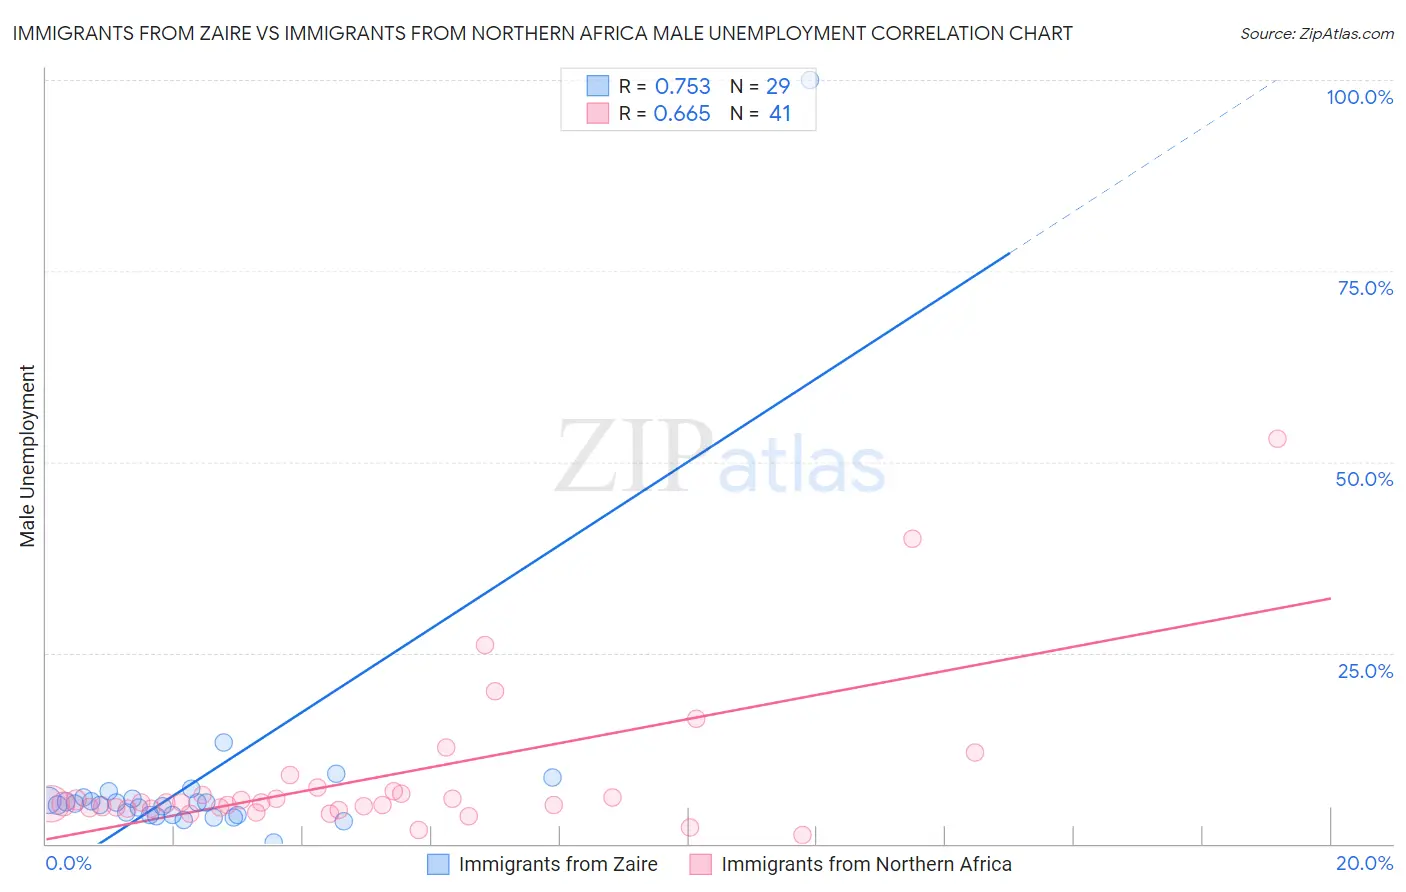 Immigrants from Zaire vs Immigrants from Northern Africa Male Unemployment